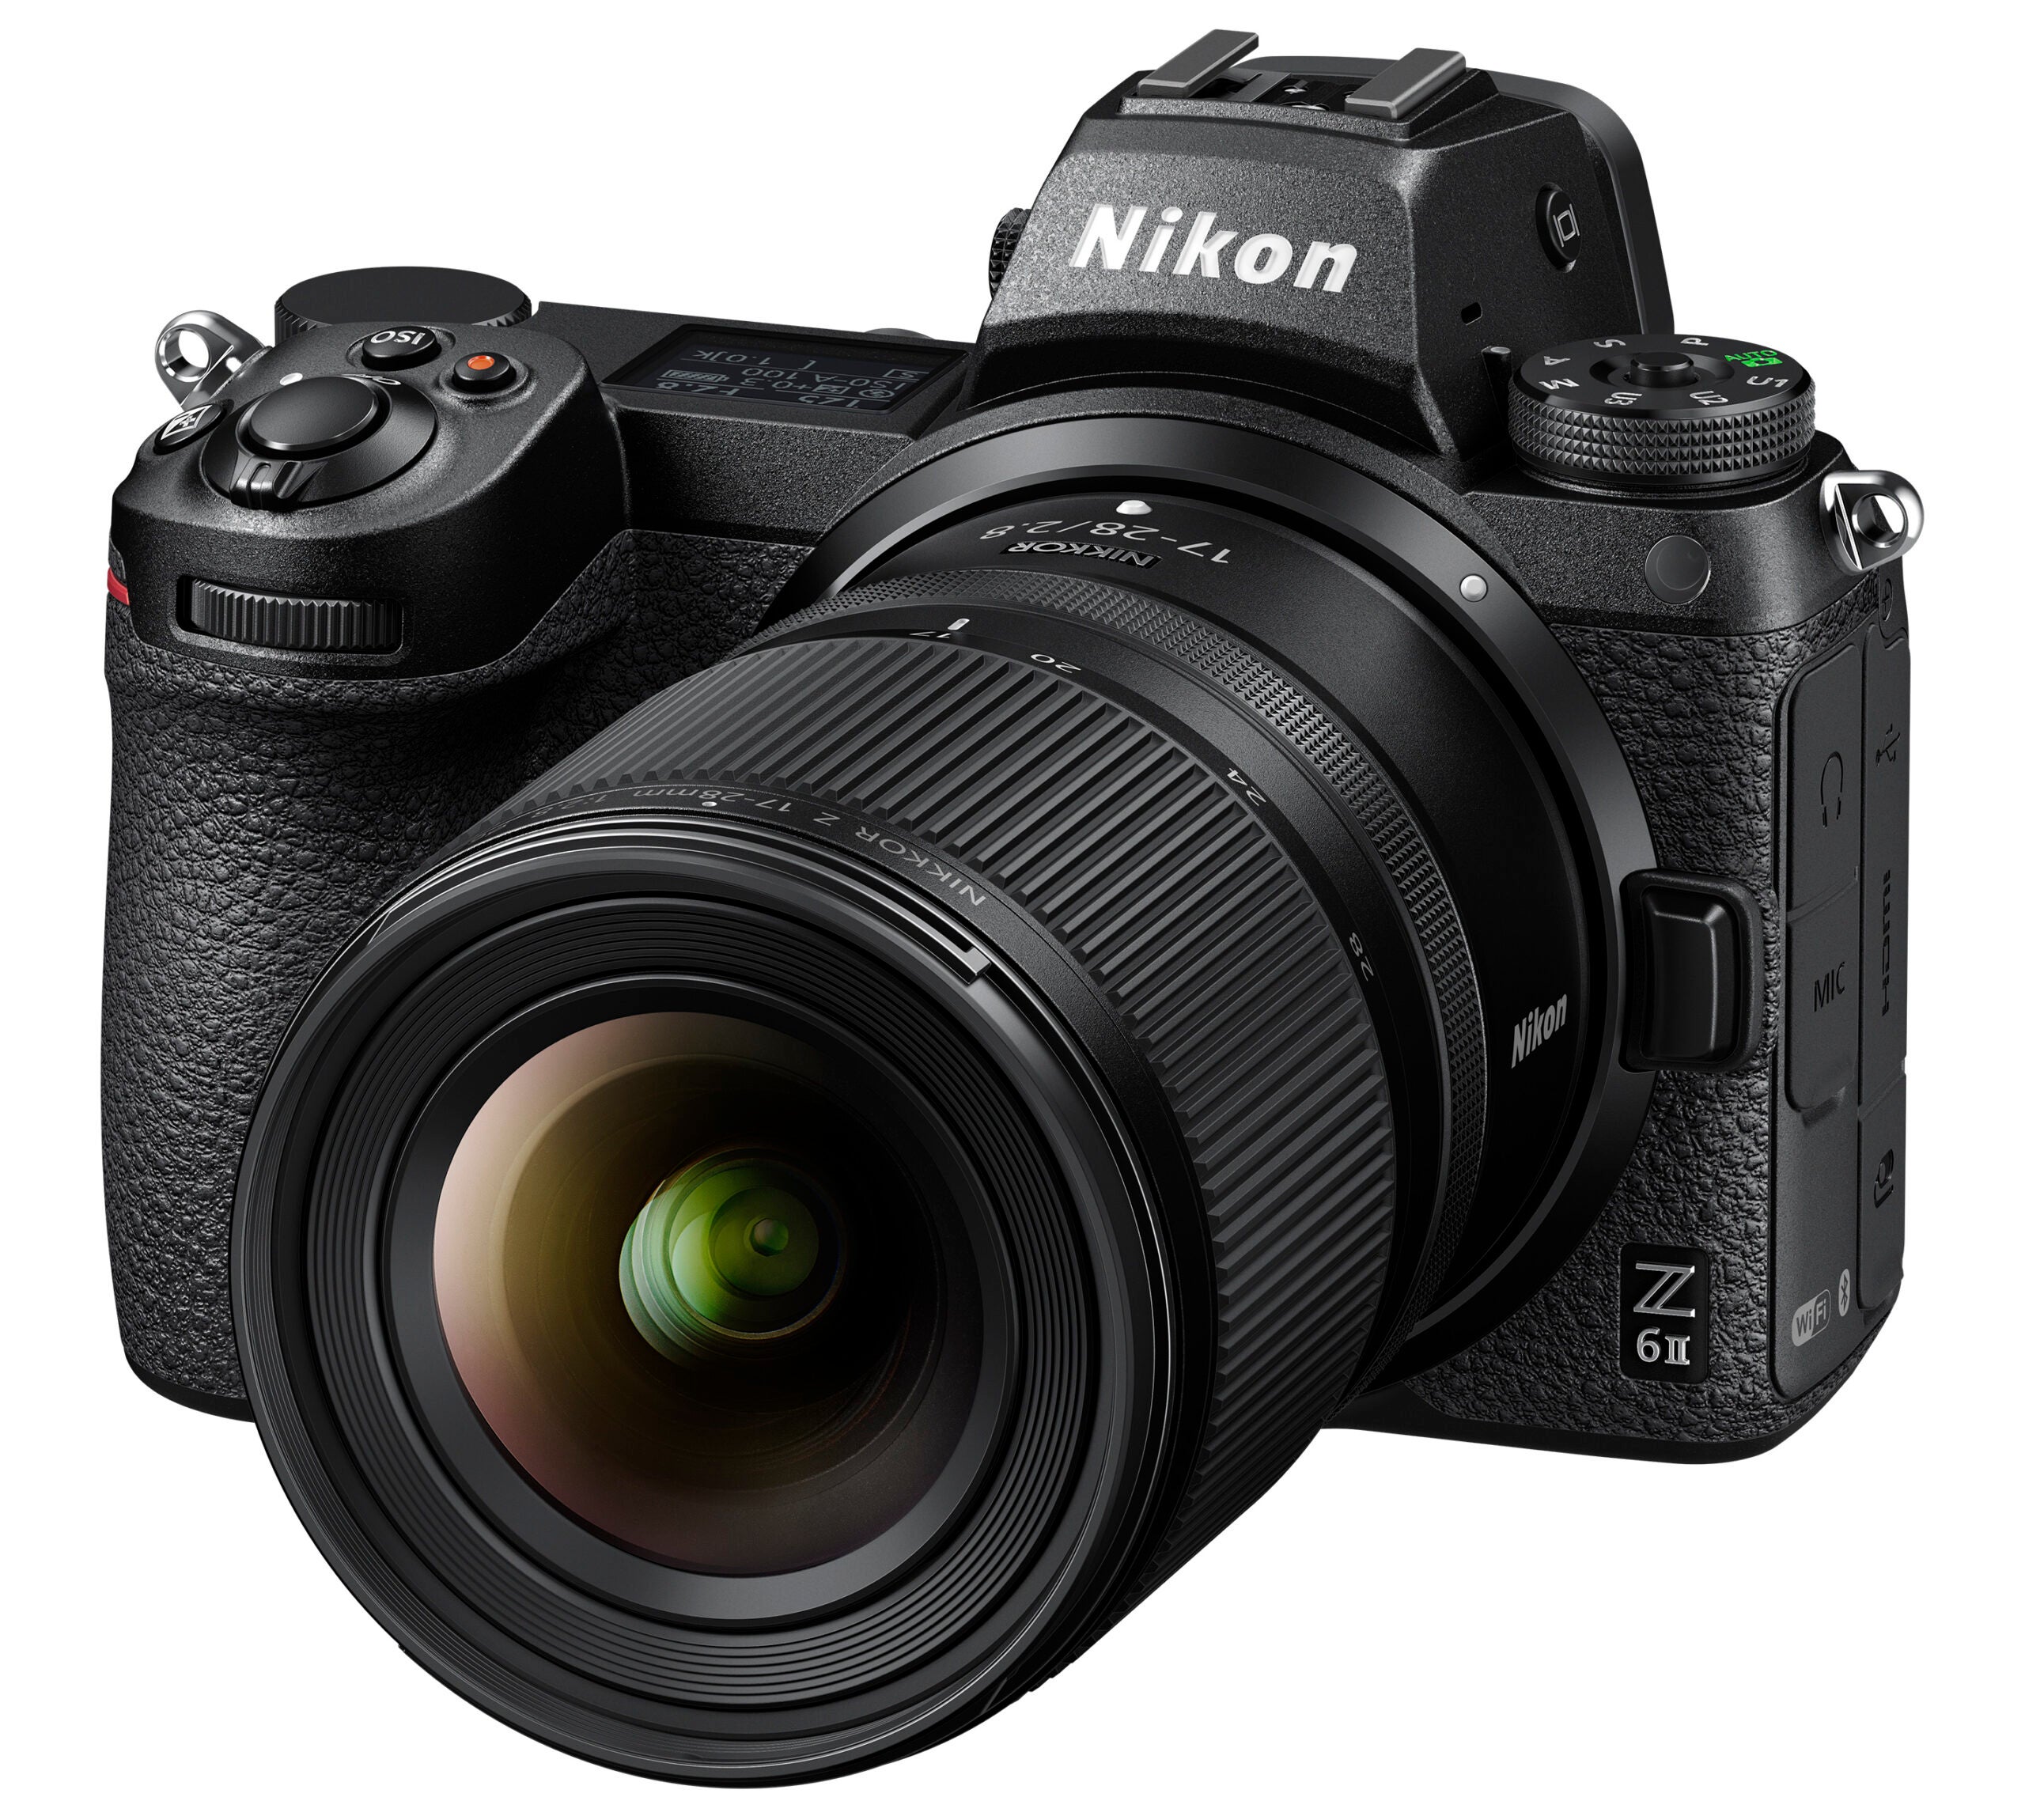 The new Nikon 17-28mm f/2.8 is a versatile and affordable lens.